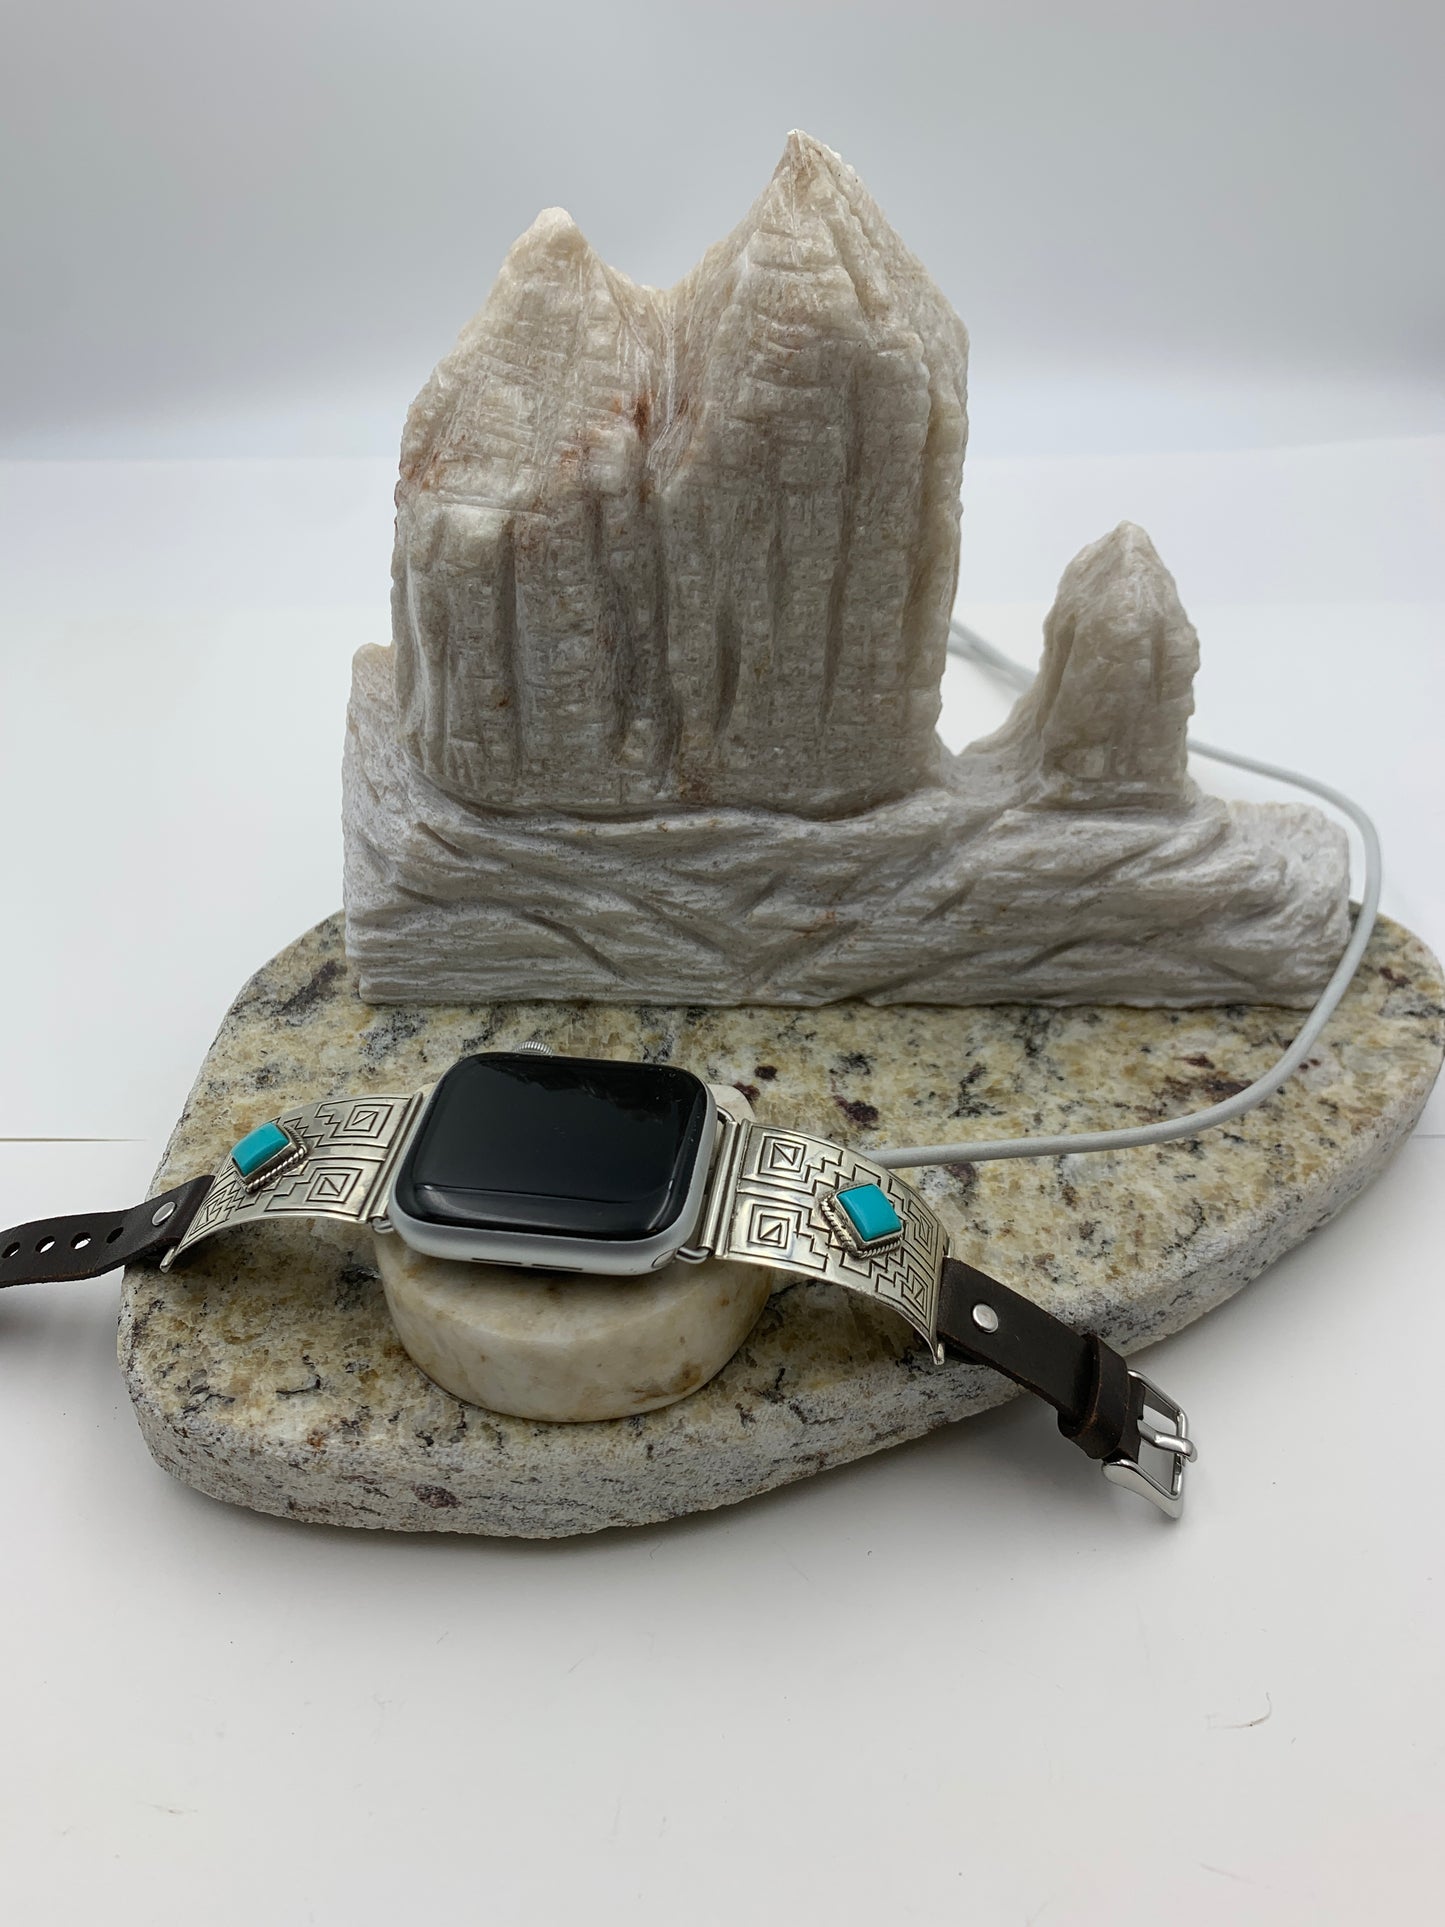 Native American Apple WATCH Charging Station (JT52 Shiprock)